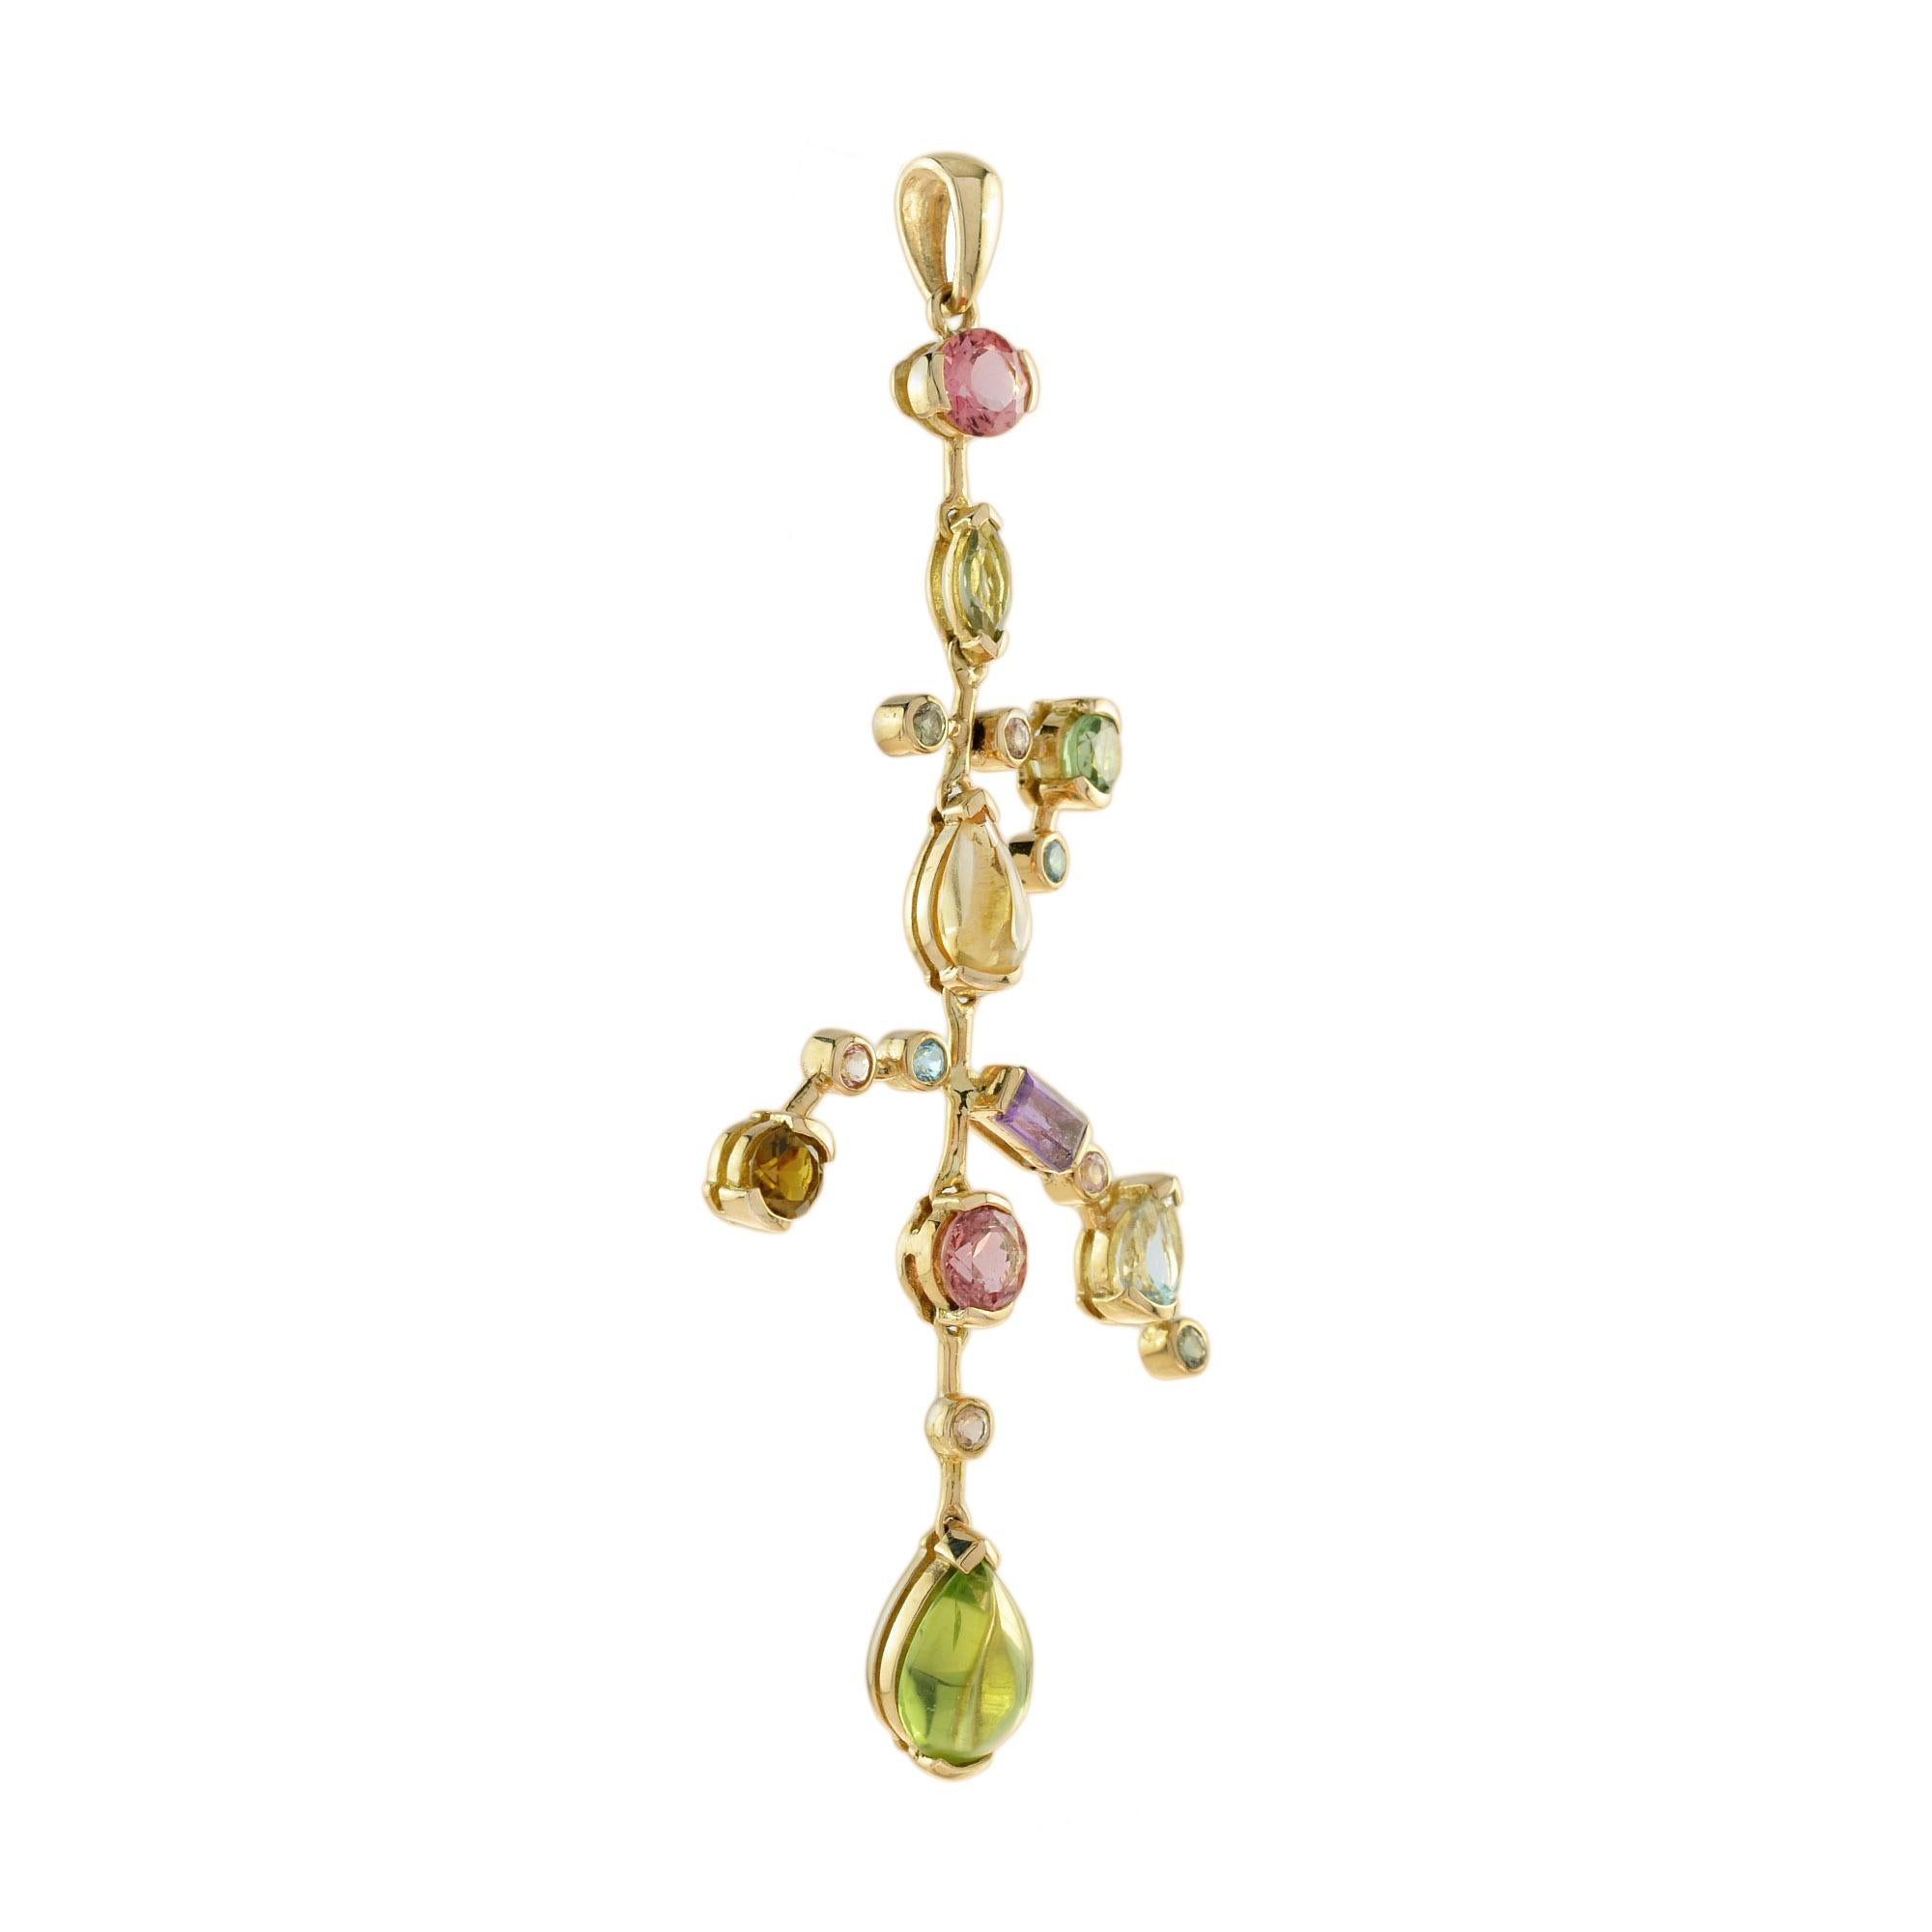 A stunning one-of-a-kind multi-colored pendant made up of tourmaline, peridot, and citrine.
These little droplets of color move and capture the light as the pendant is worn. Wear on your favorite chain for a statement look.

Information
Metal: 14K